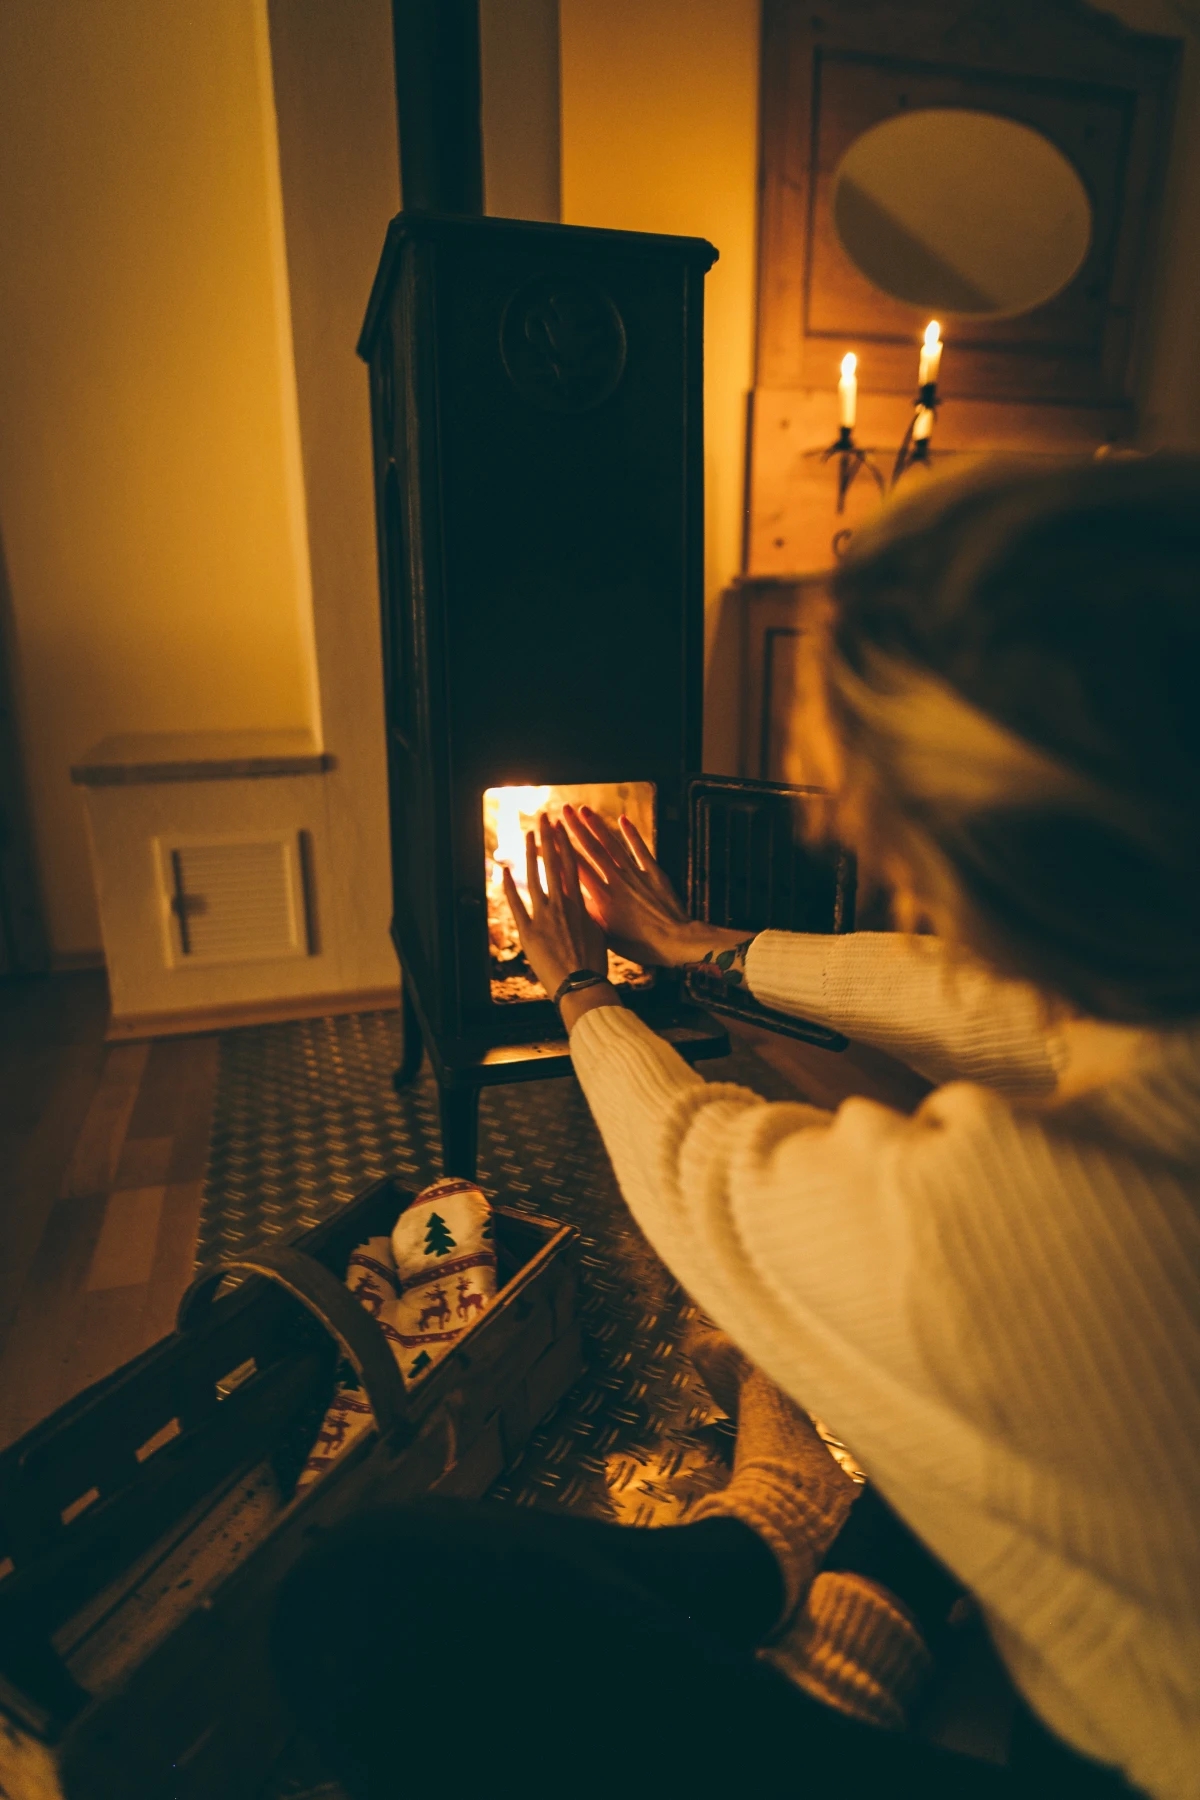 How To Keep Warm Without Turning Up The Heat: 4 Simple Tricks